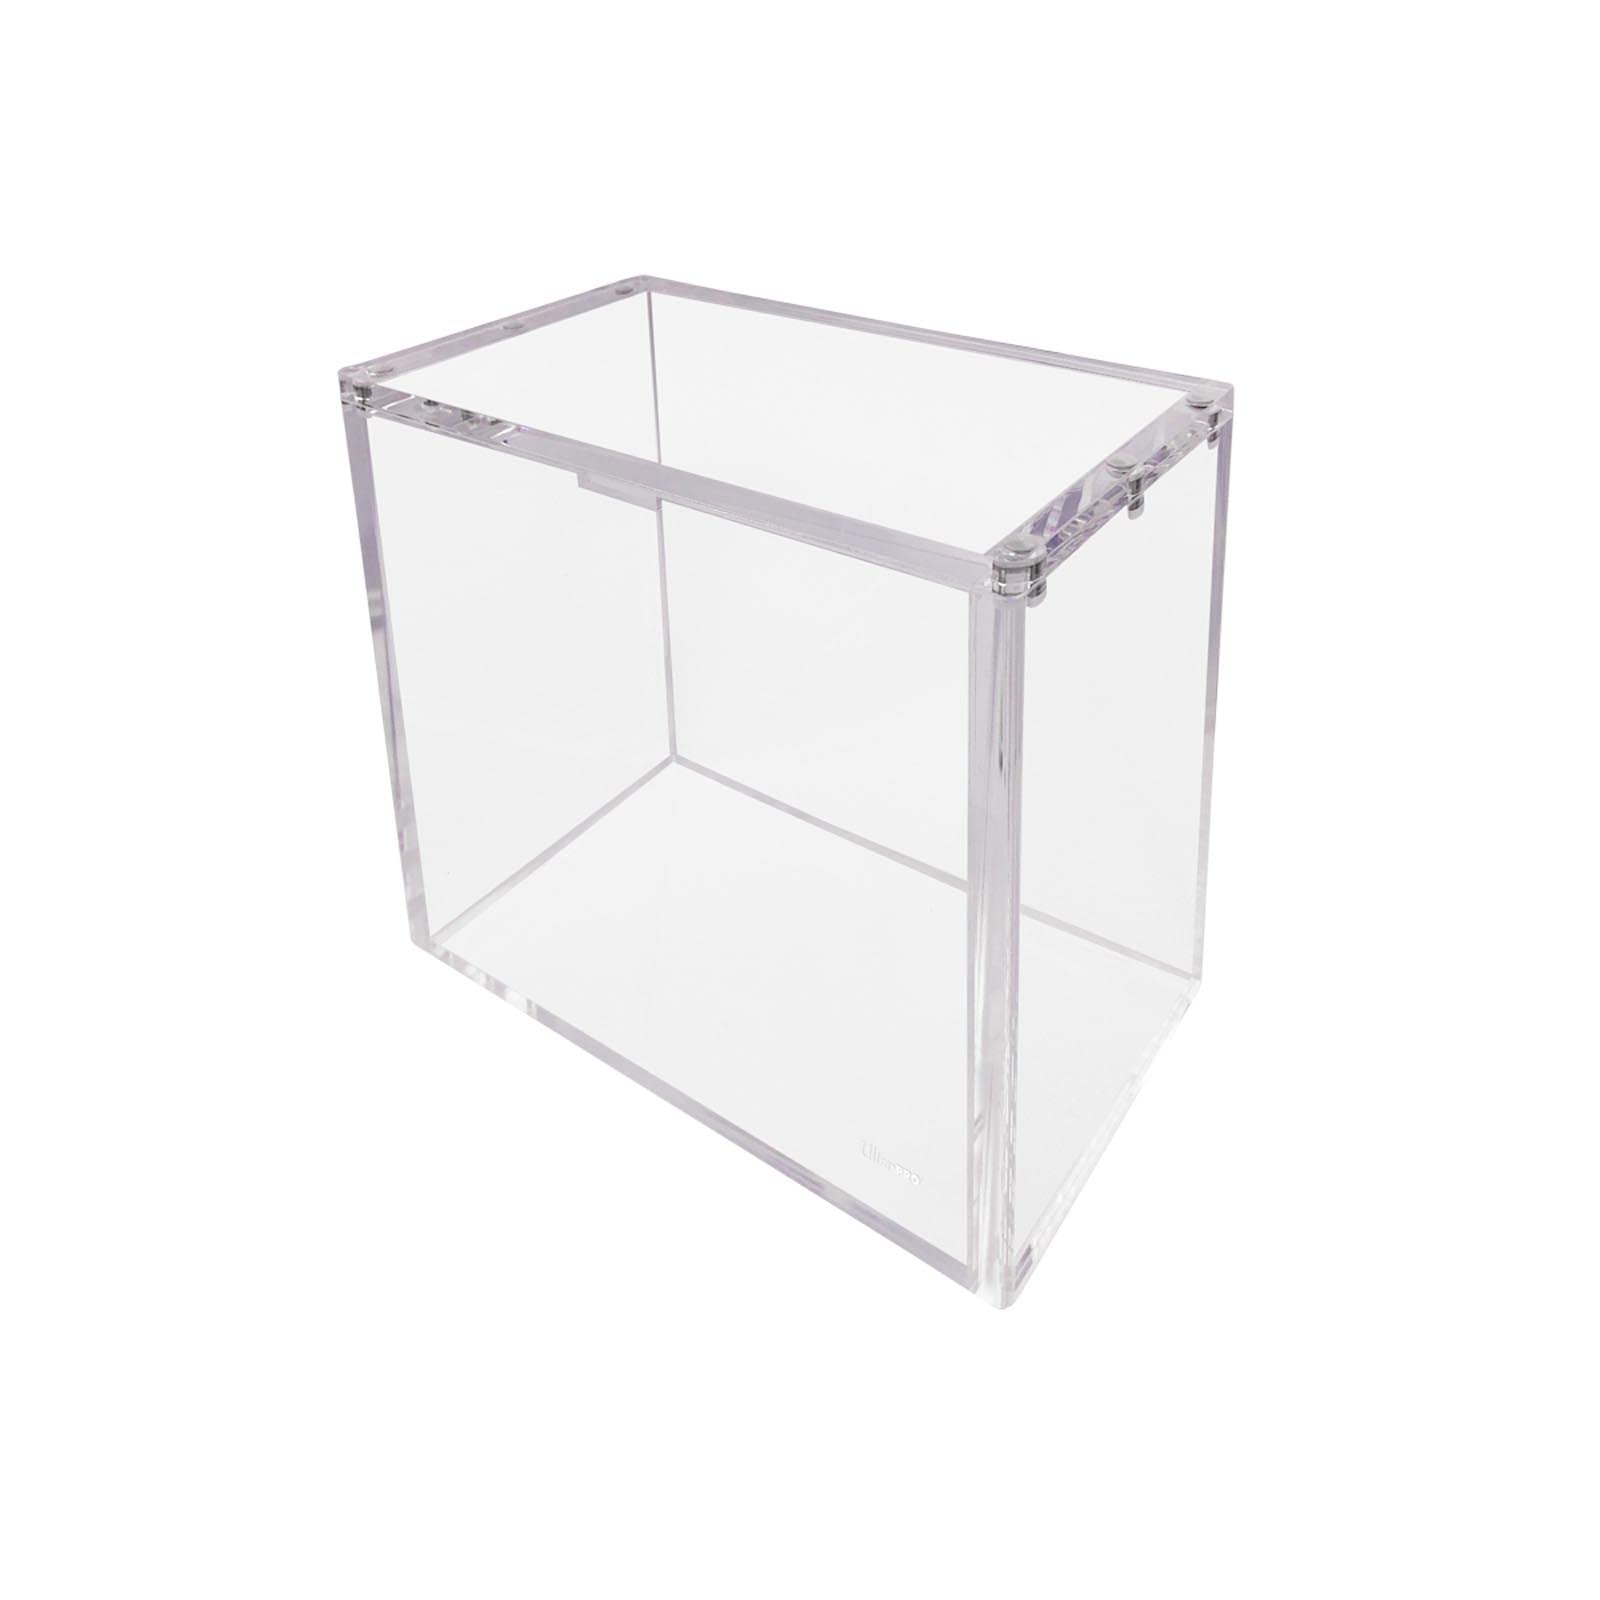 Ultra PRO - Acrylic Display Box for Pokémon Booster Pack - Protect Your Collectible Cards, and Gaming Cards in Original in Box Condition, Card Protector